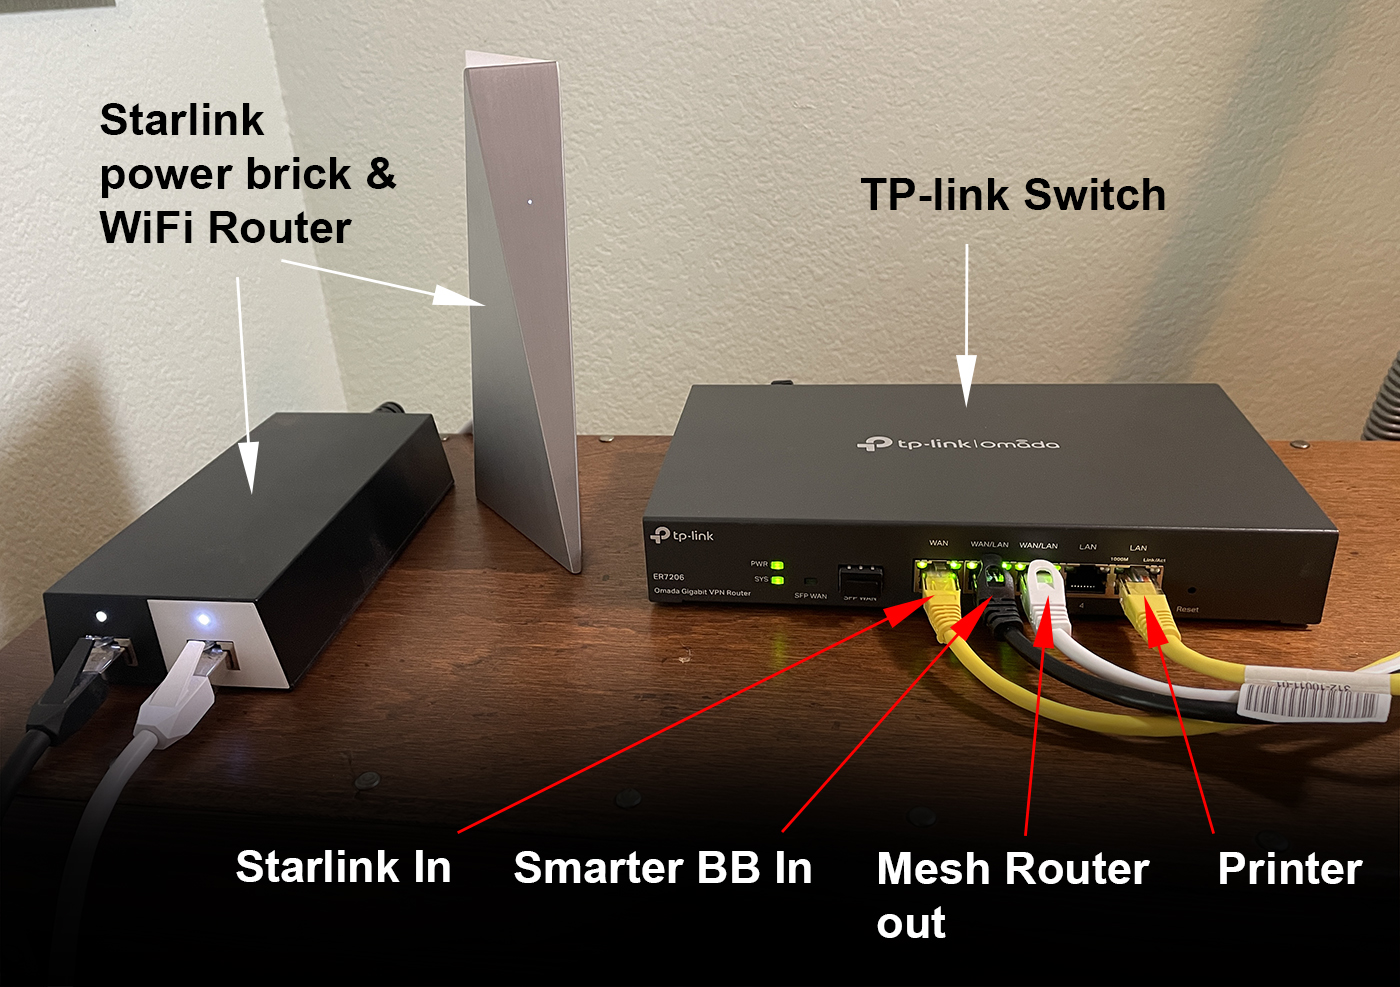 Starlink Update - First Service: ProVideo by Coalition Fail? or Pass in - Foster Year Jeff